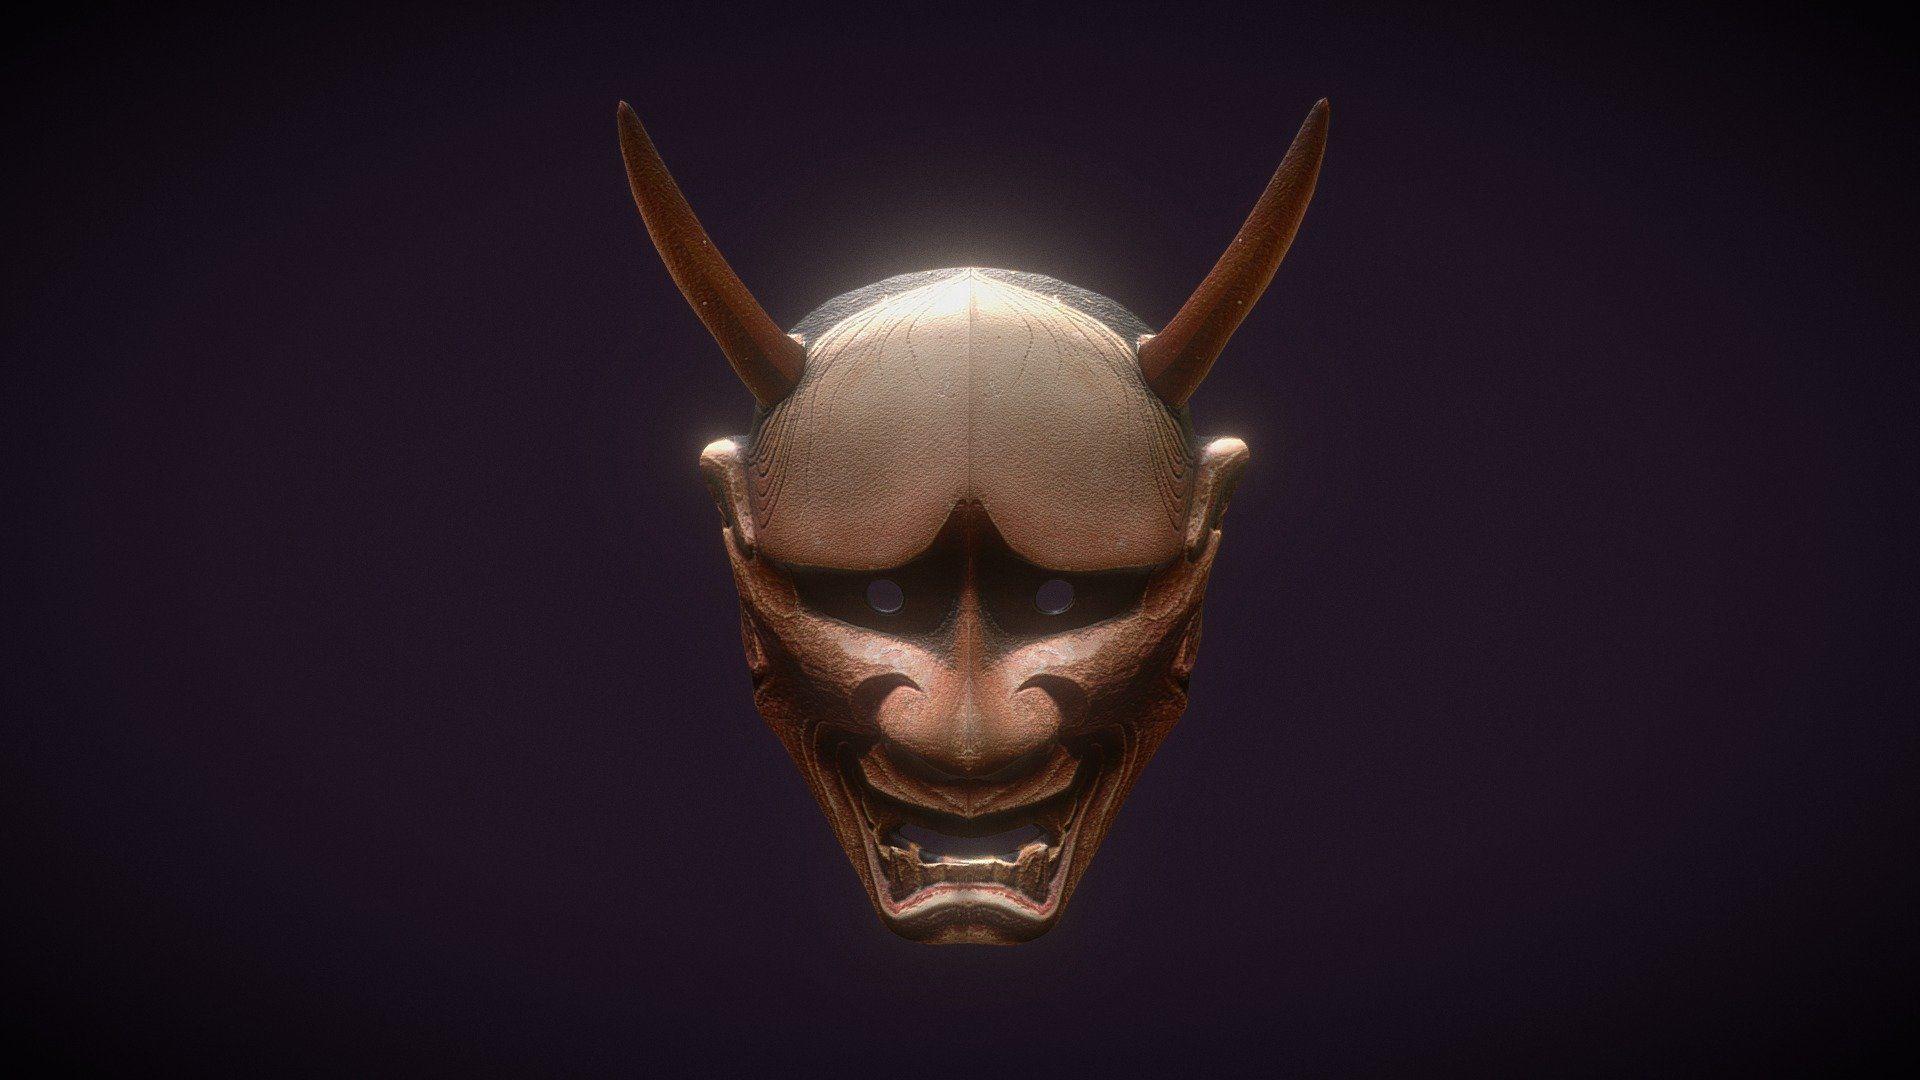 Oni Mask Wallpaper HD Picture Of Mask Jcimages.Org